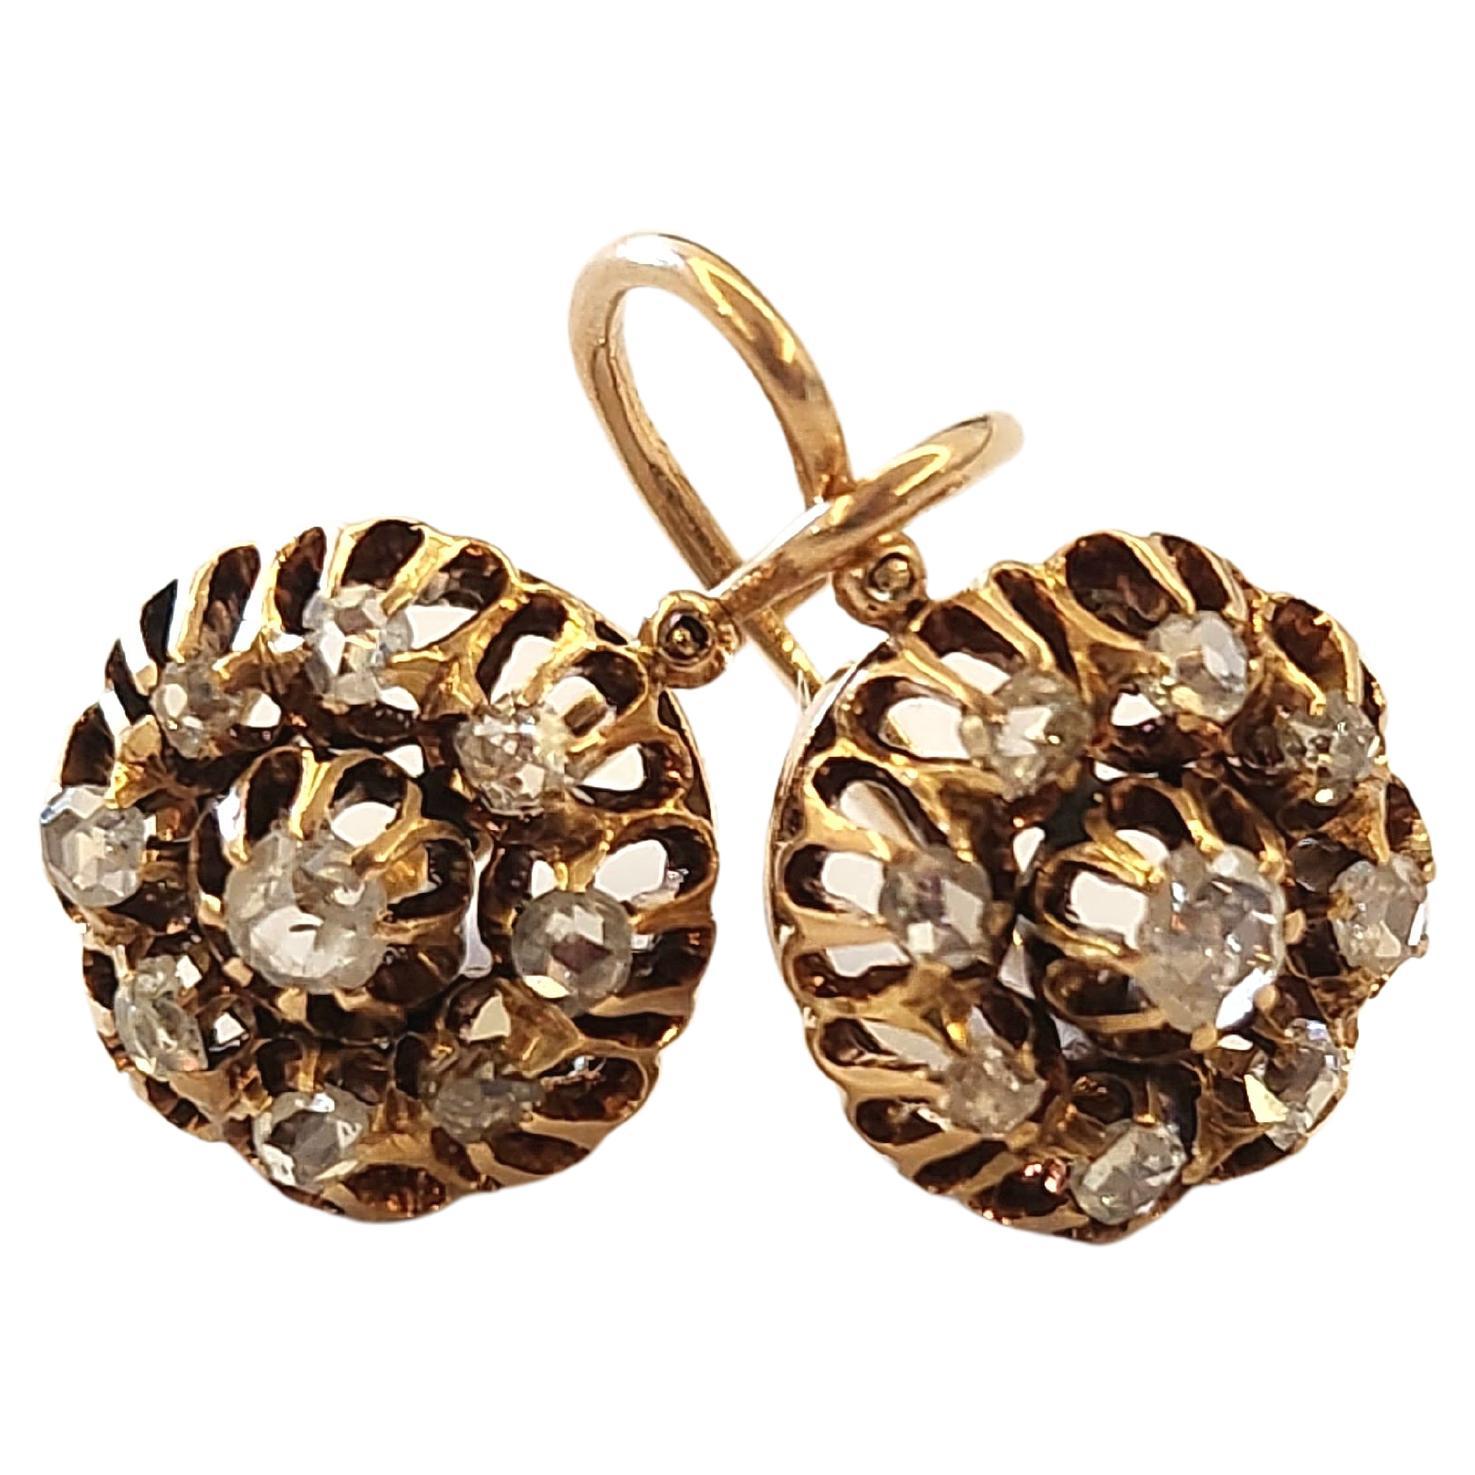 Victorian earrings with large pear shaped rose cut diamonds - Gallerease